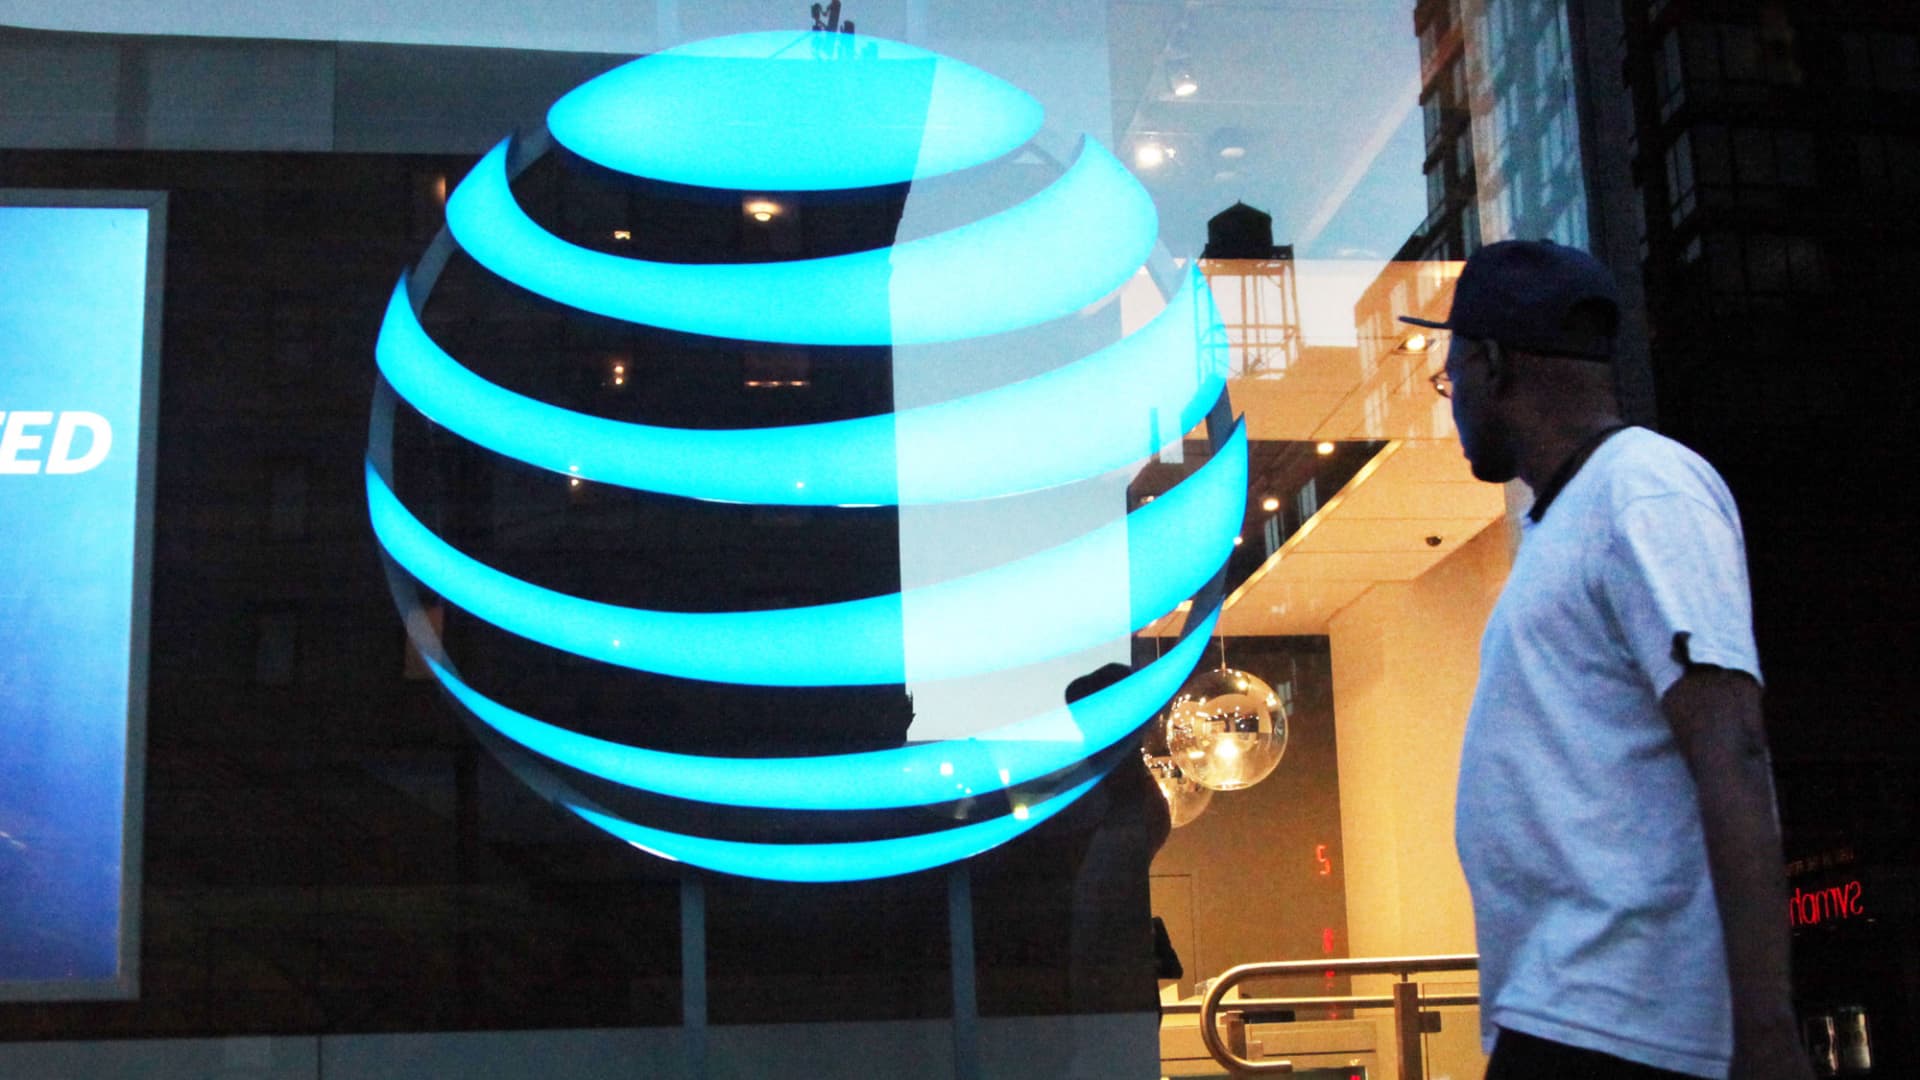 AT&T subscriber growth tops analyst expectations, stock jumps